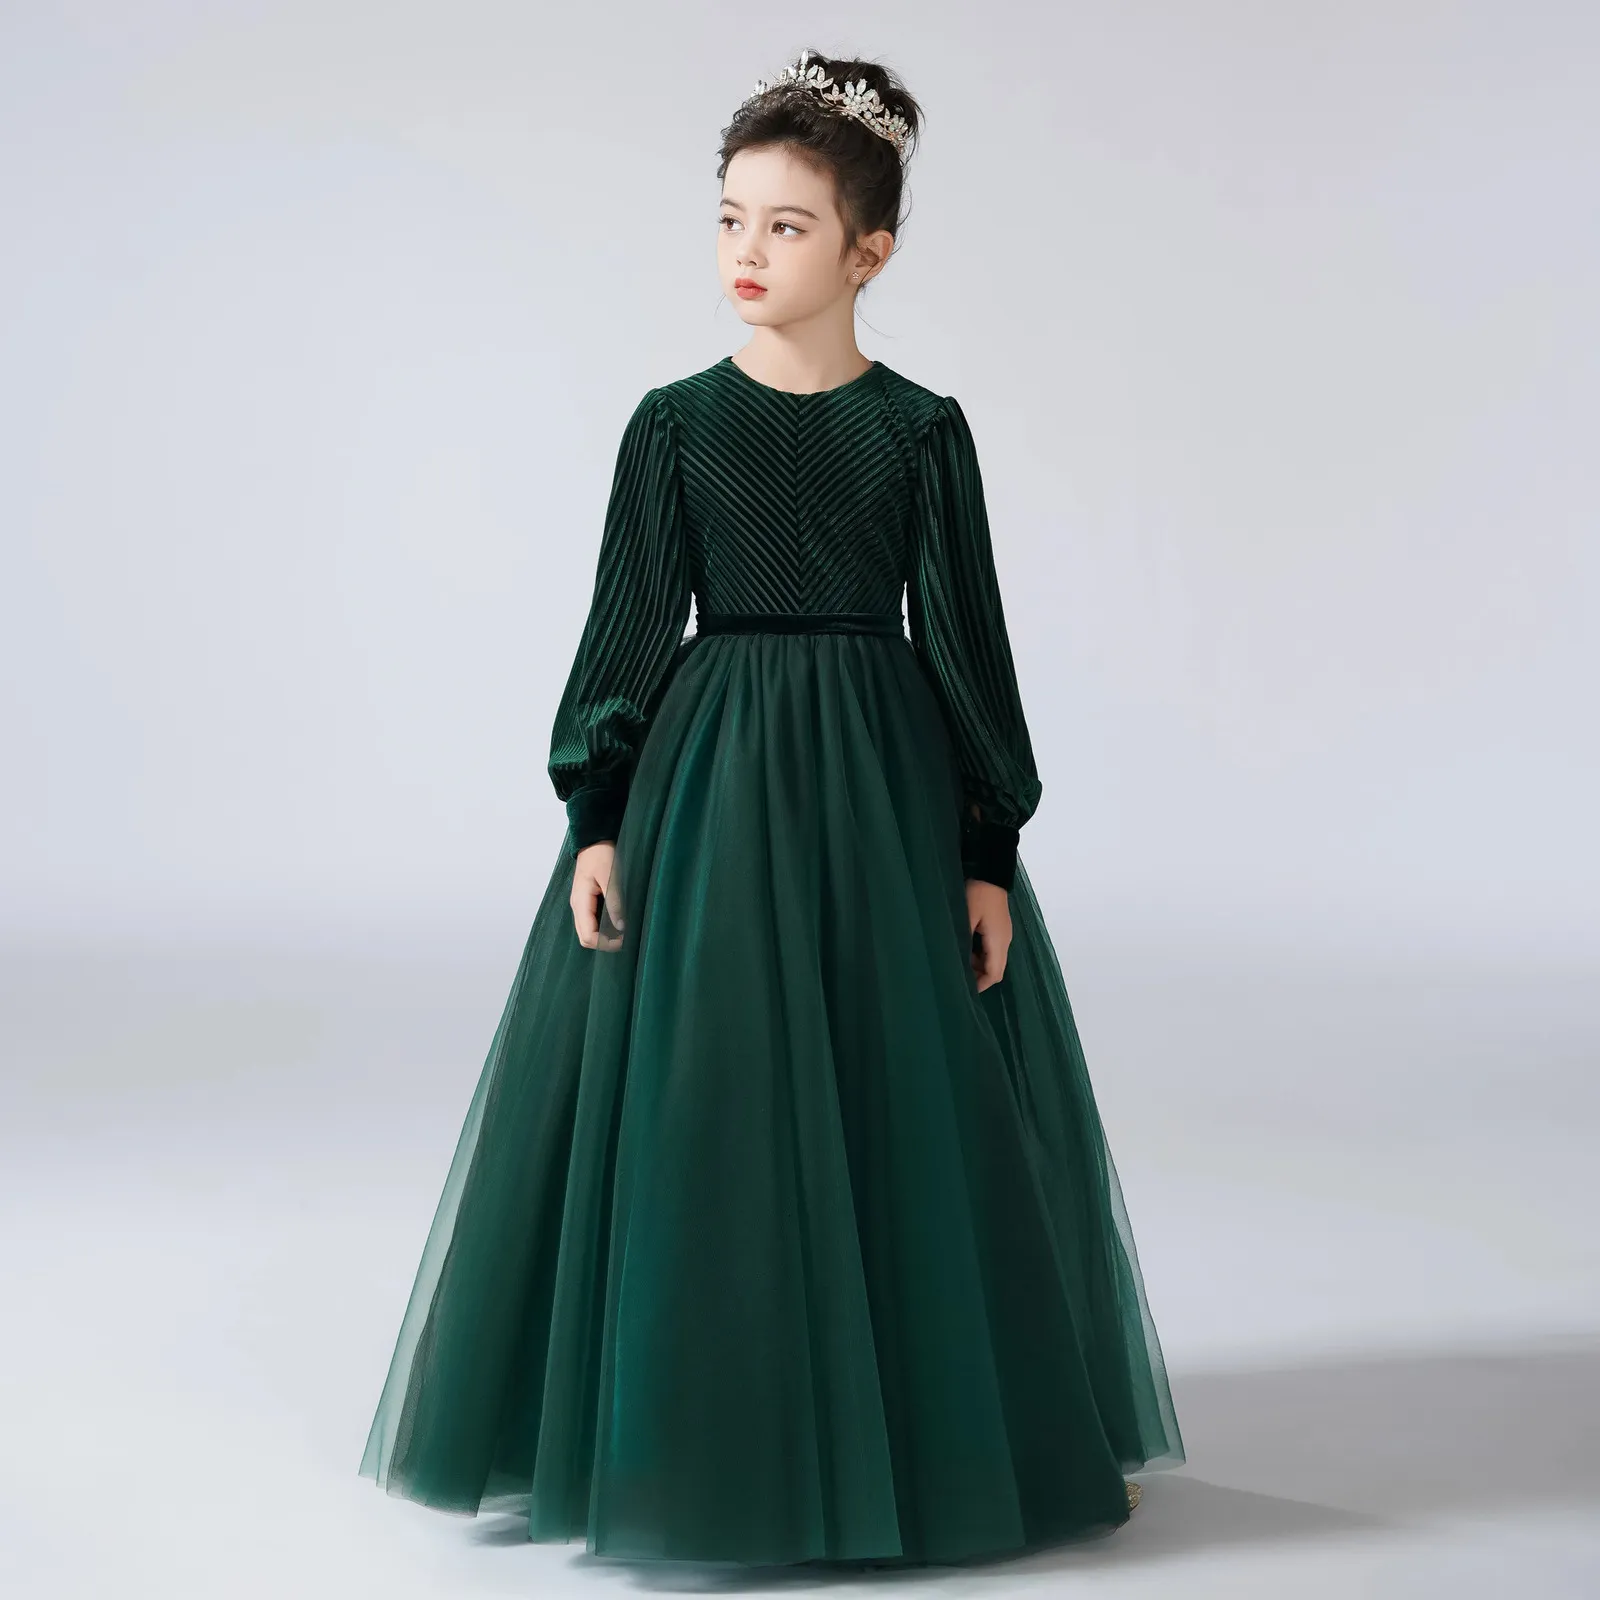 Dideyttawl Flower Girls Dress For Party Long Sleeves Formal Pageant Gown Vintage Velvet Sleeve ONeck Junior Bridesmaid 240318